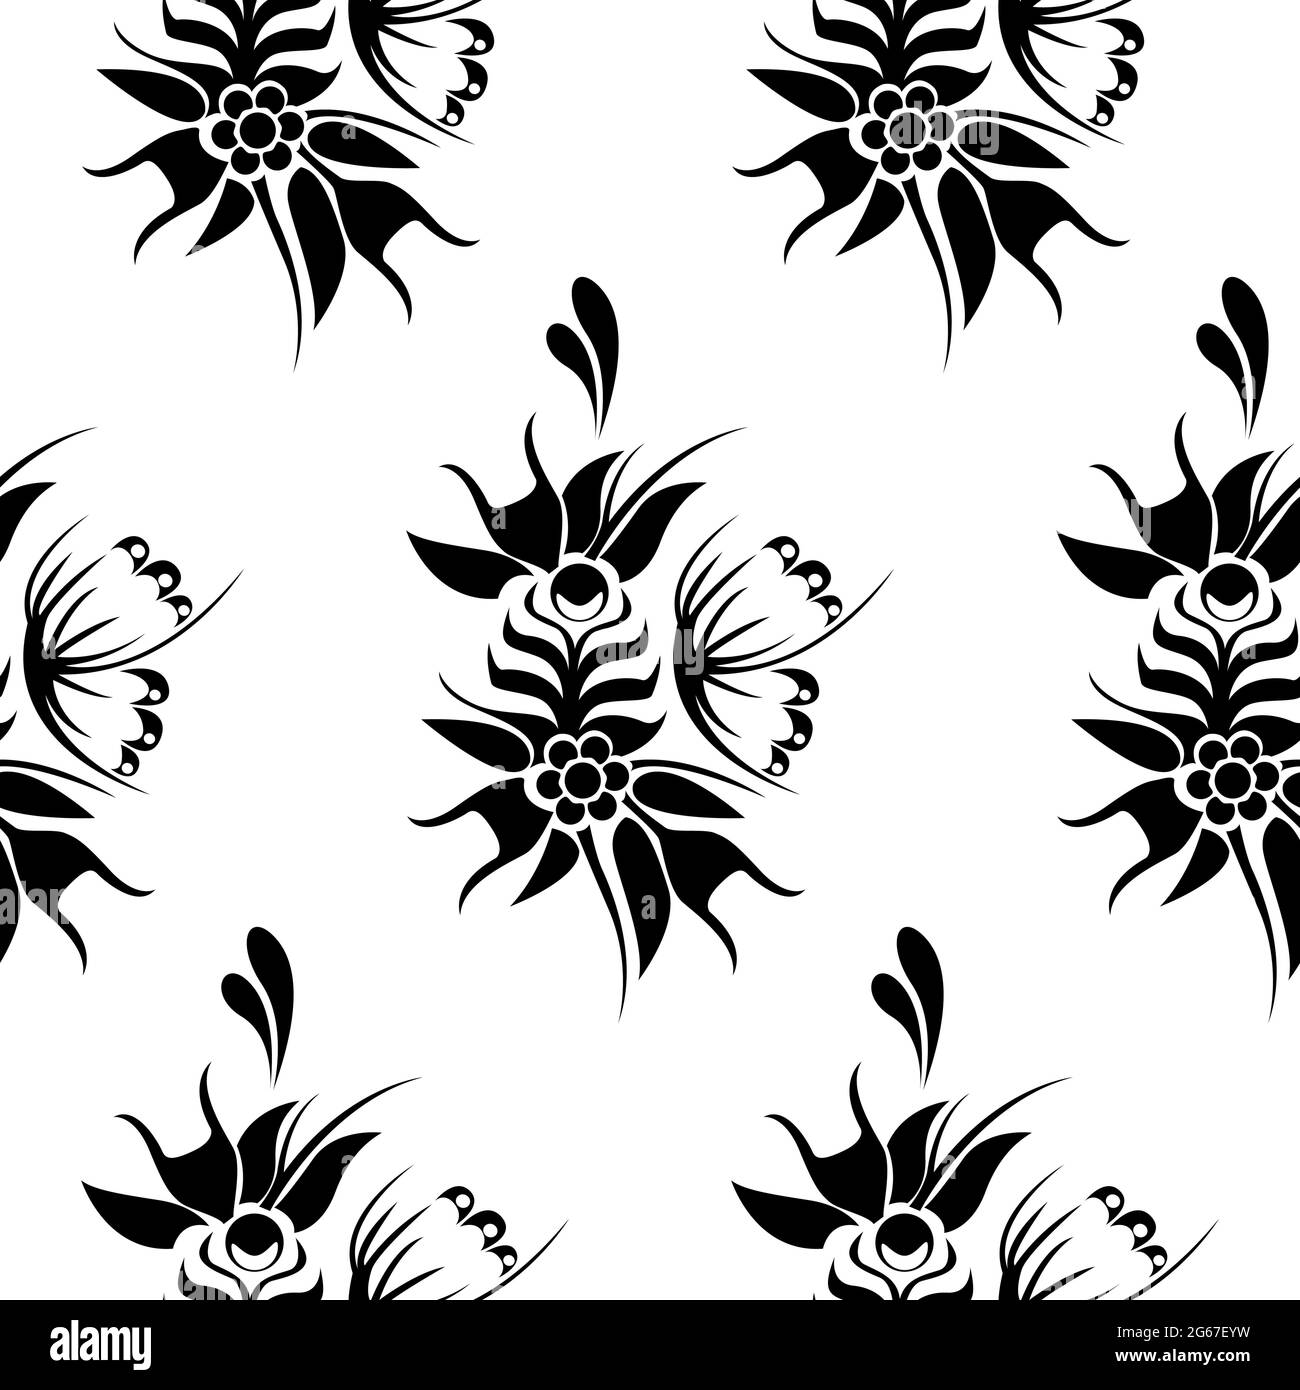 Flower seamless pattern with abstract floral branches with flying butterflies, leaves, blossom flowers and berries. Stock Vector